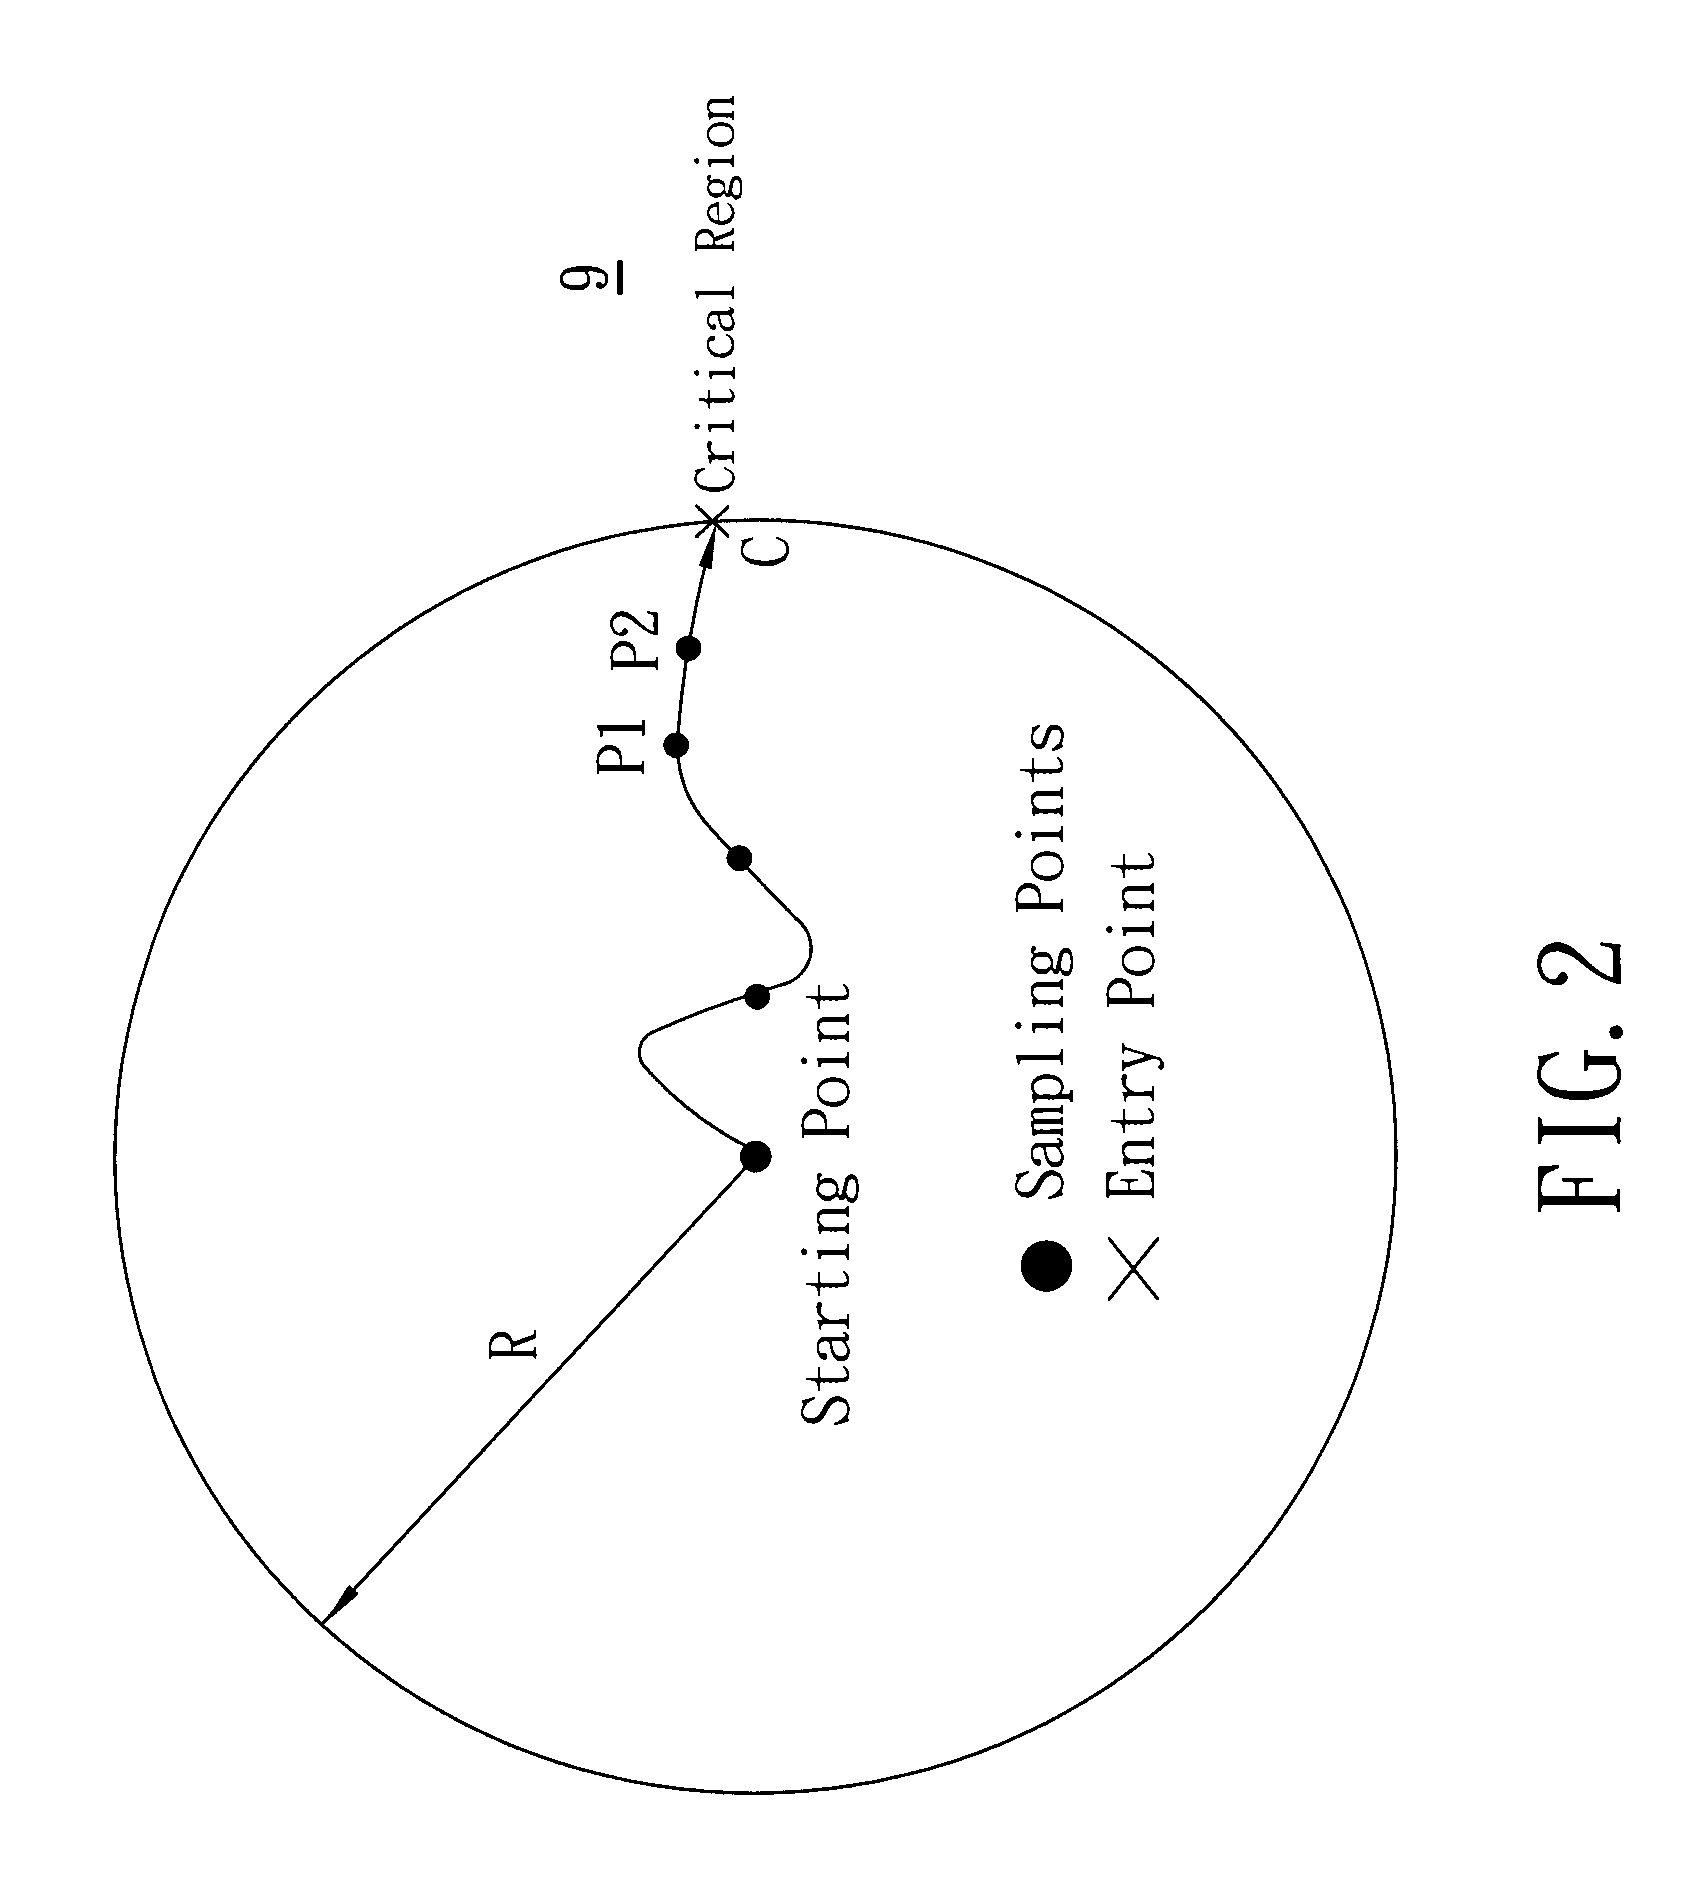 Method of reducing power consumption of a radio badge in a boundary detection localization system